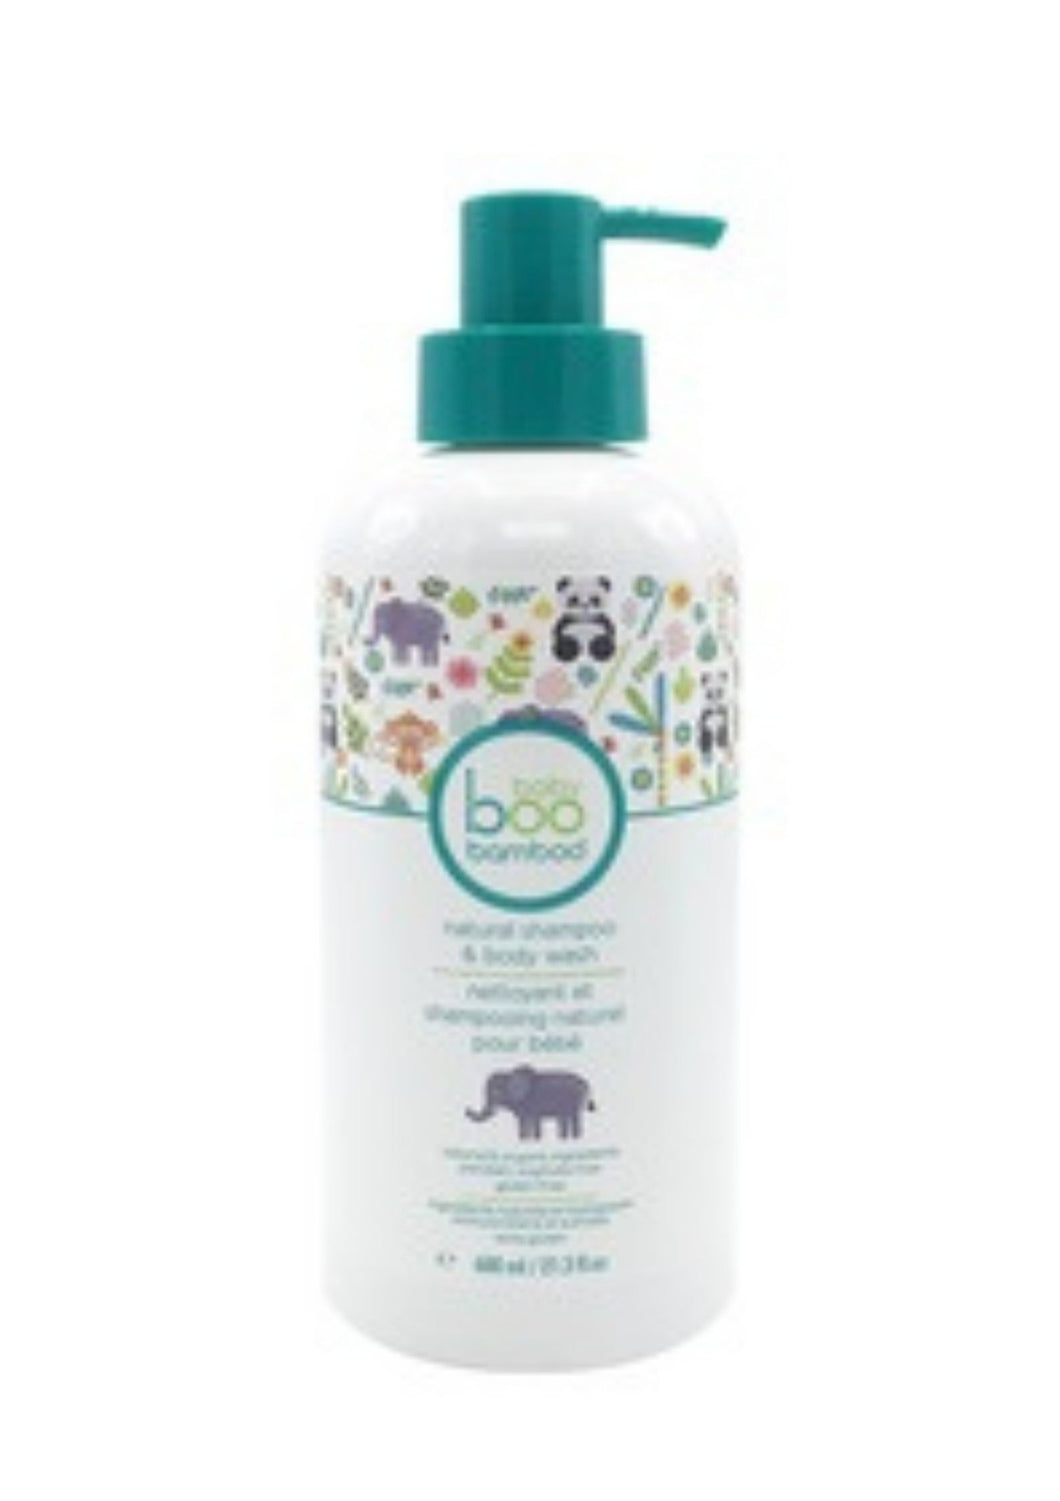 boo bamboo's tear-free Natural Baby Shampoo & Body Wash cleanser gently washes baby’s hair and body, moisturizing from head-to-toe using the highest-quality natural  and  organic  ingredients.  The pH balanced formula cleanses without stripping away natural oils and is safe even on the most sensitive newborn skin. Gentle enough to use daily. No synthetic fragrances or colours. (600ml) $20.00